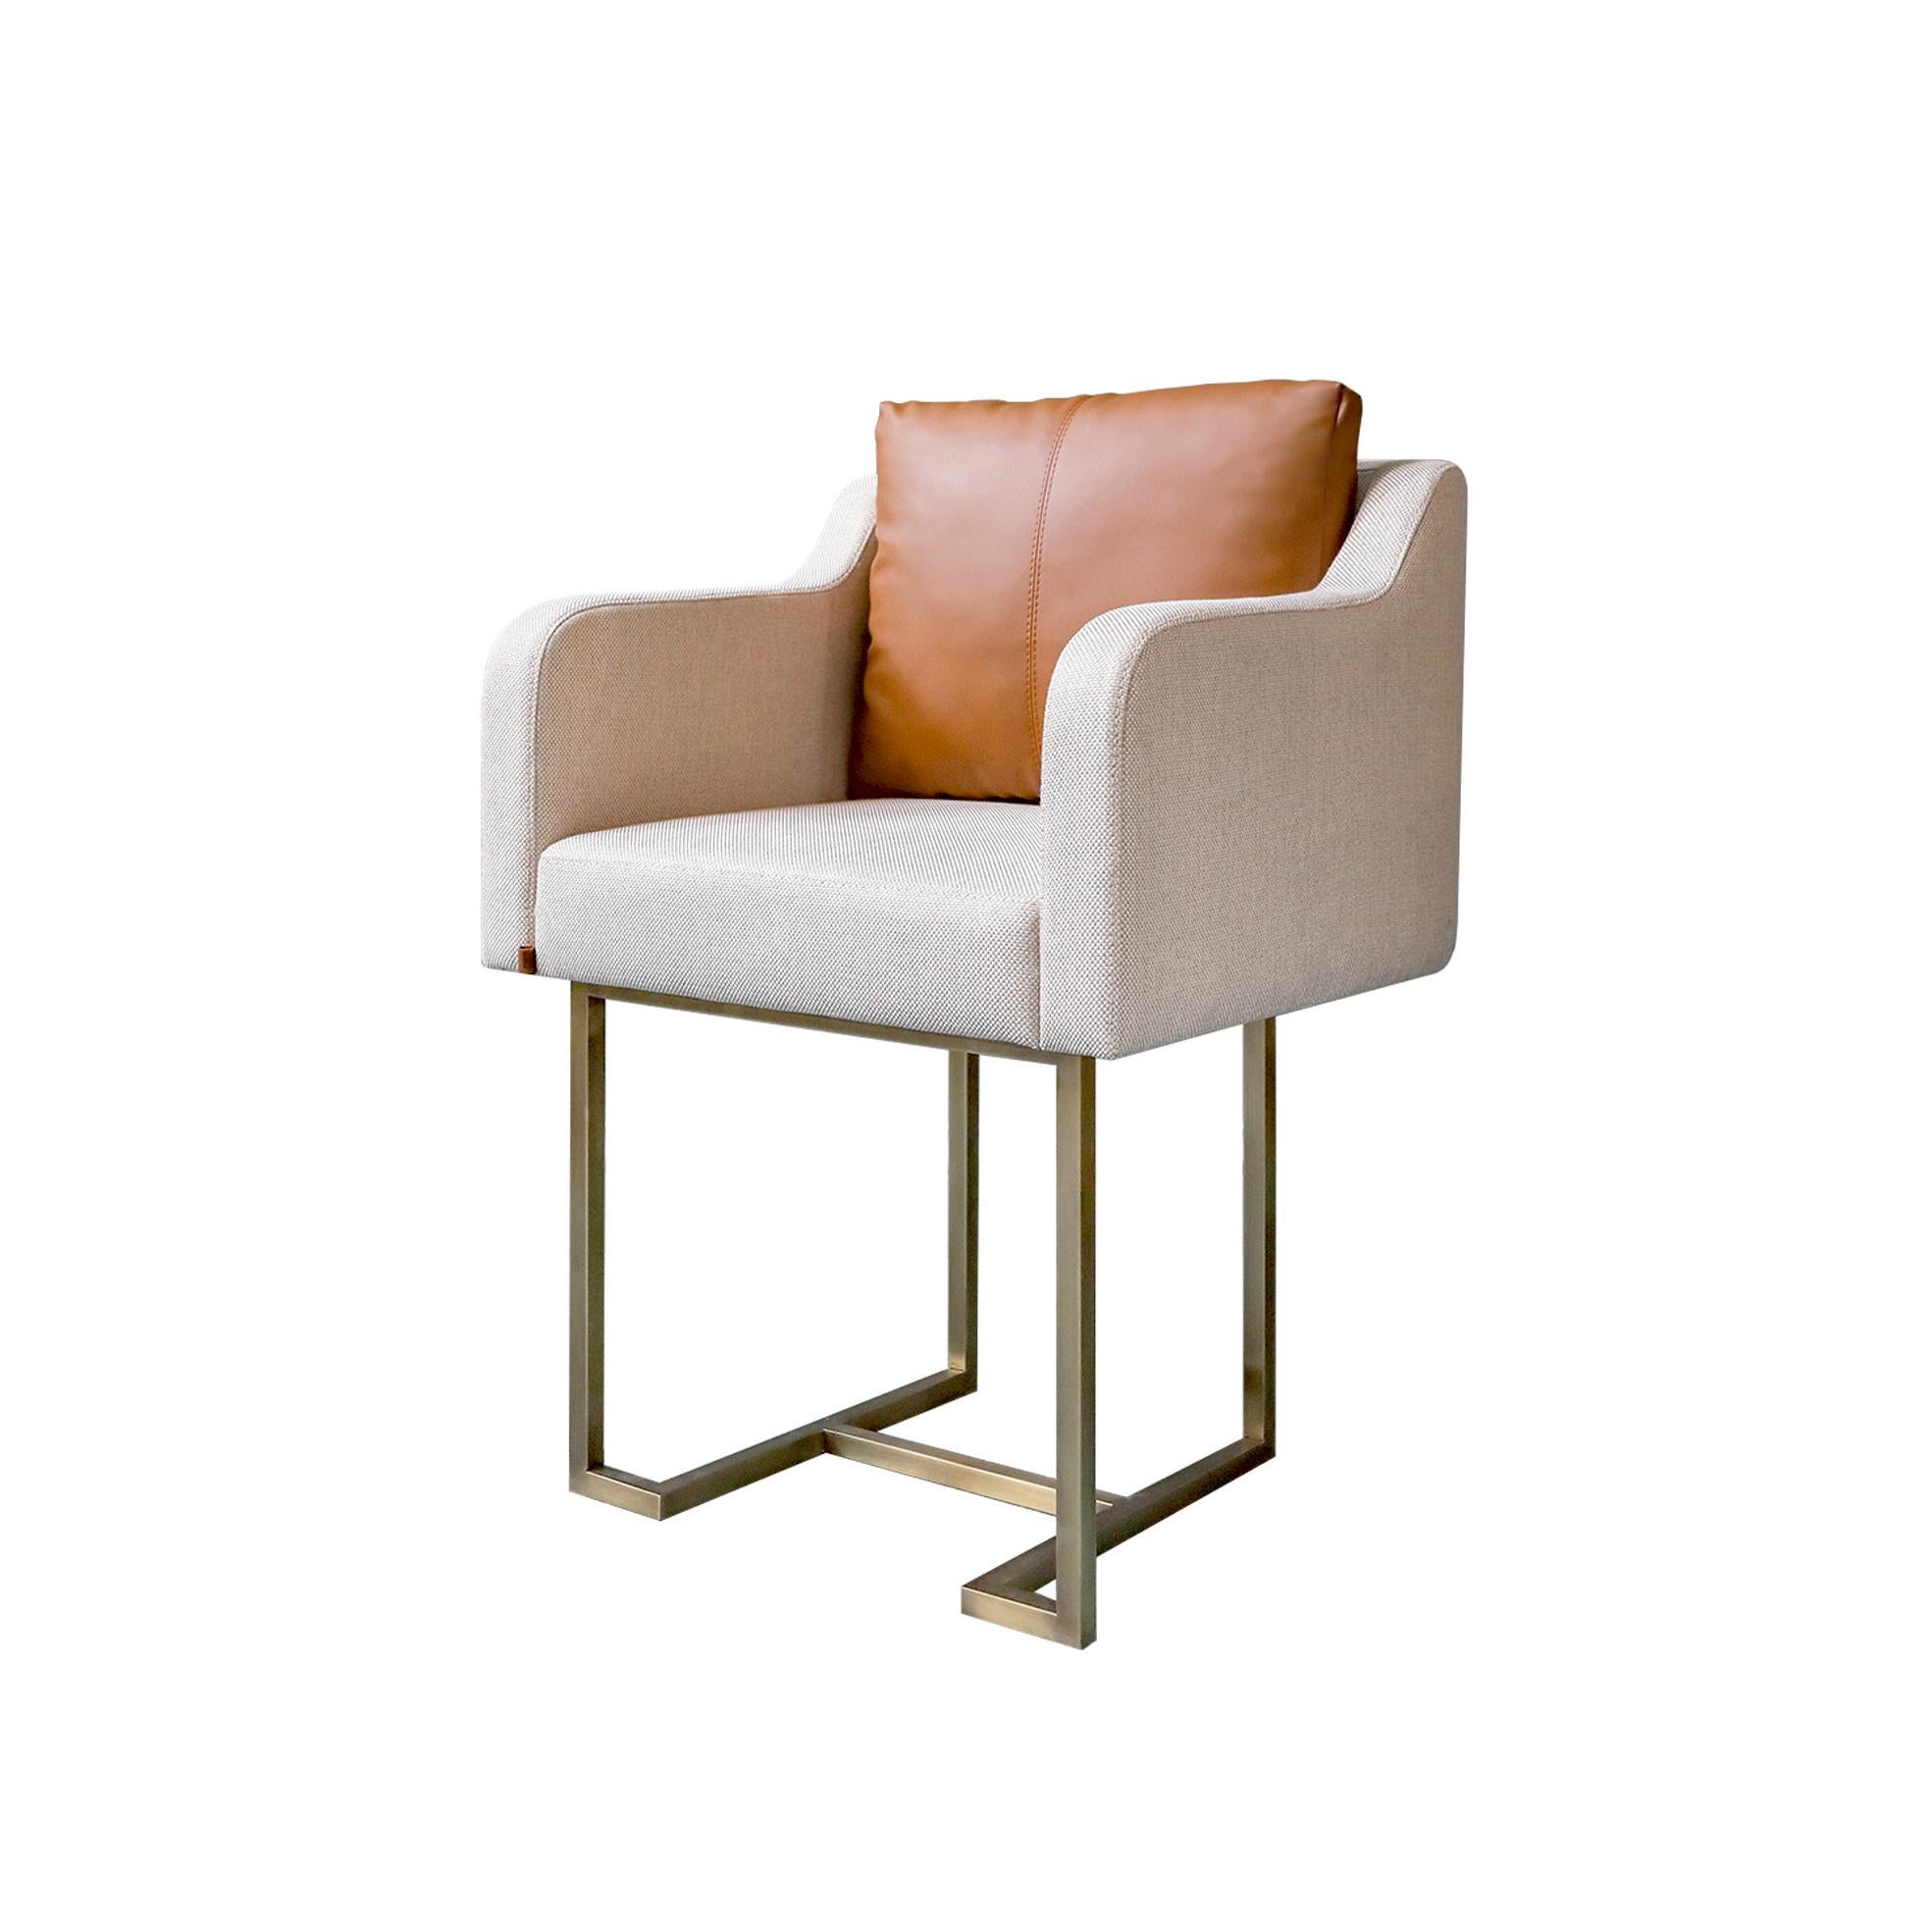 Papillonne chair comes to your living room with its details, combining comfort with elegance. It is also suitable for combining with your dining table. The chair cushion can be produced high or in the same size as the chair back.

Dimensions: